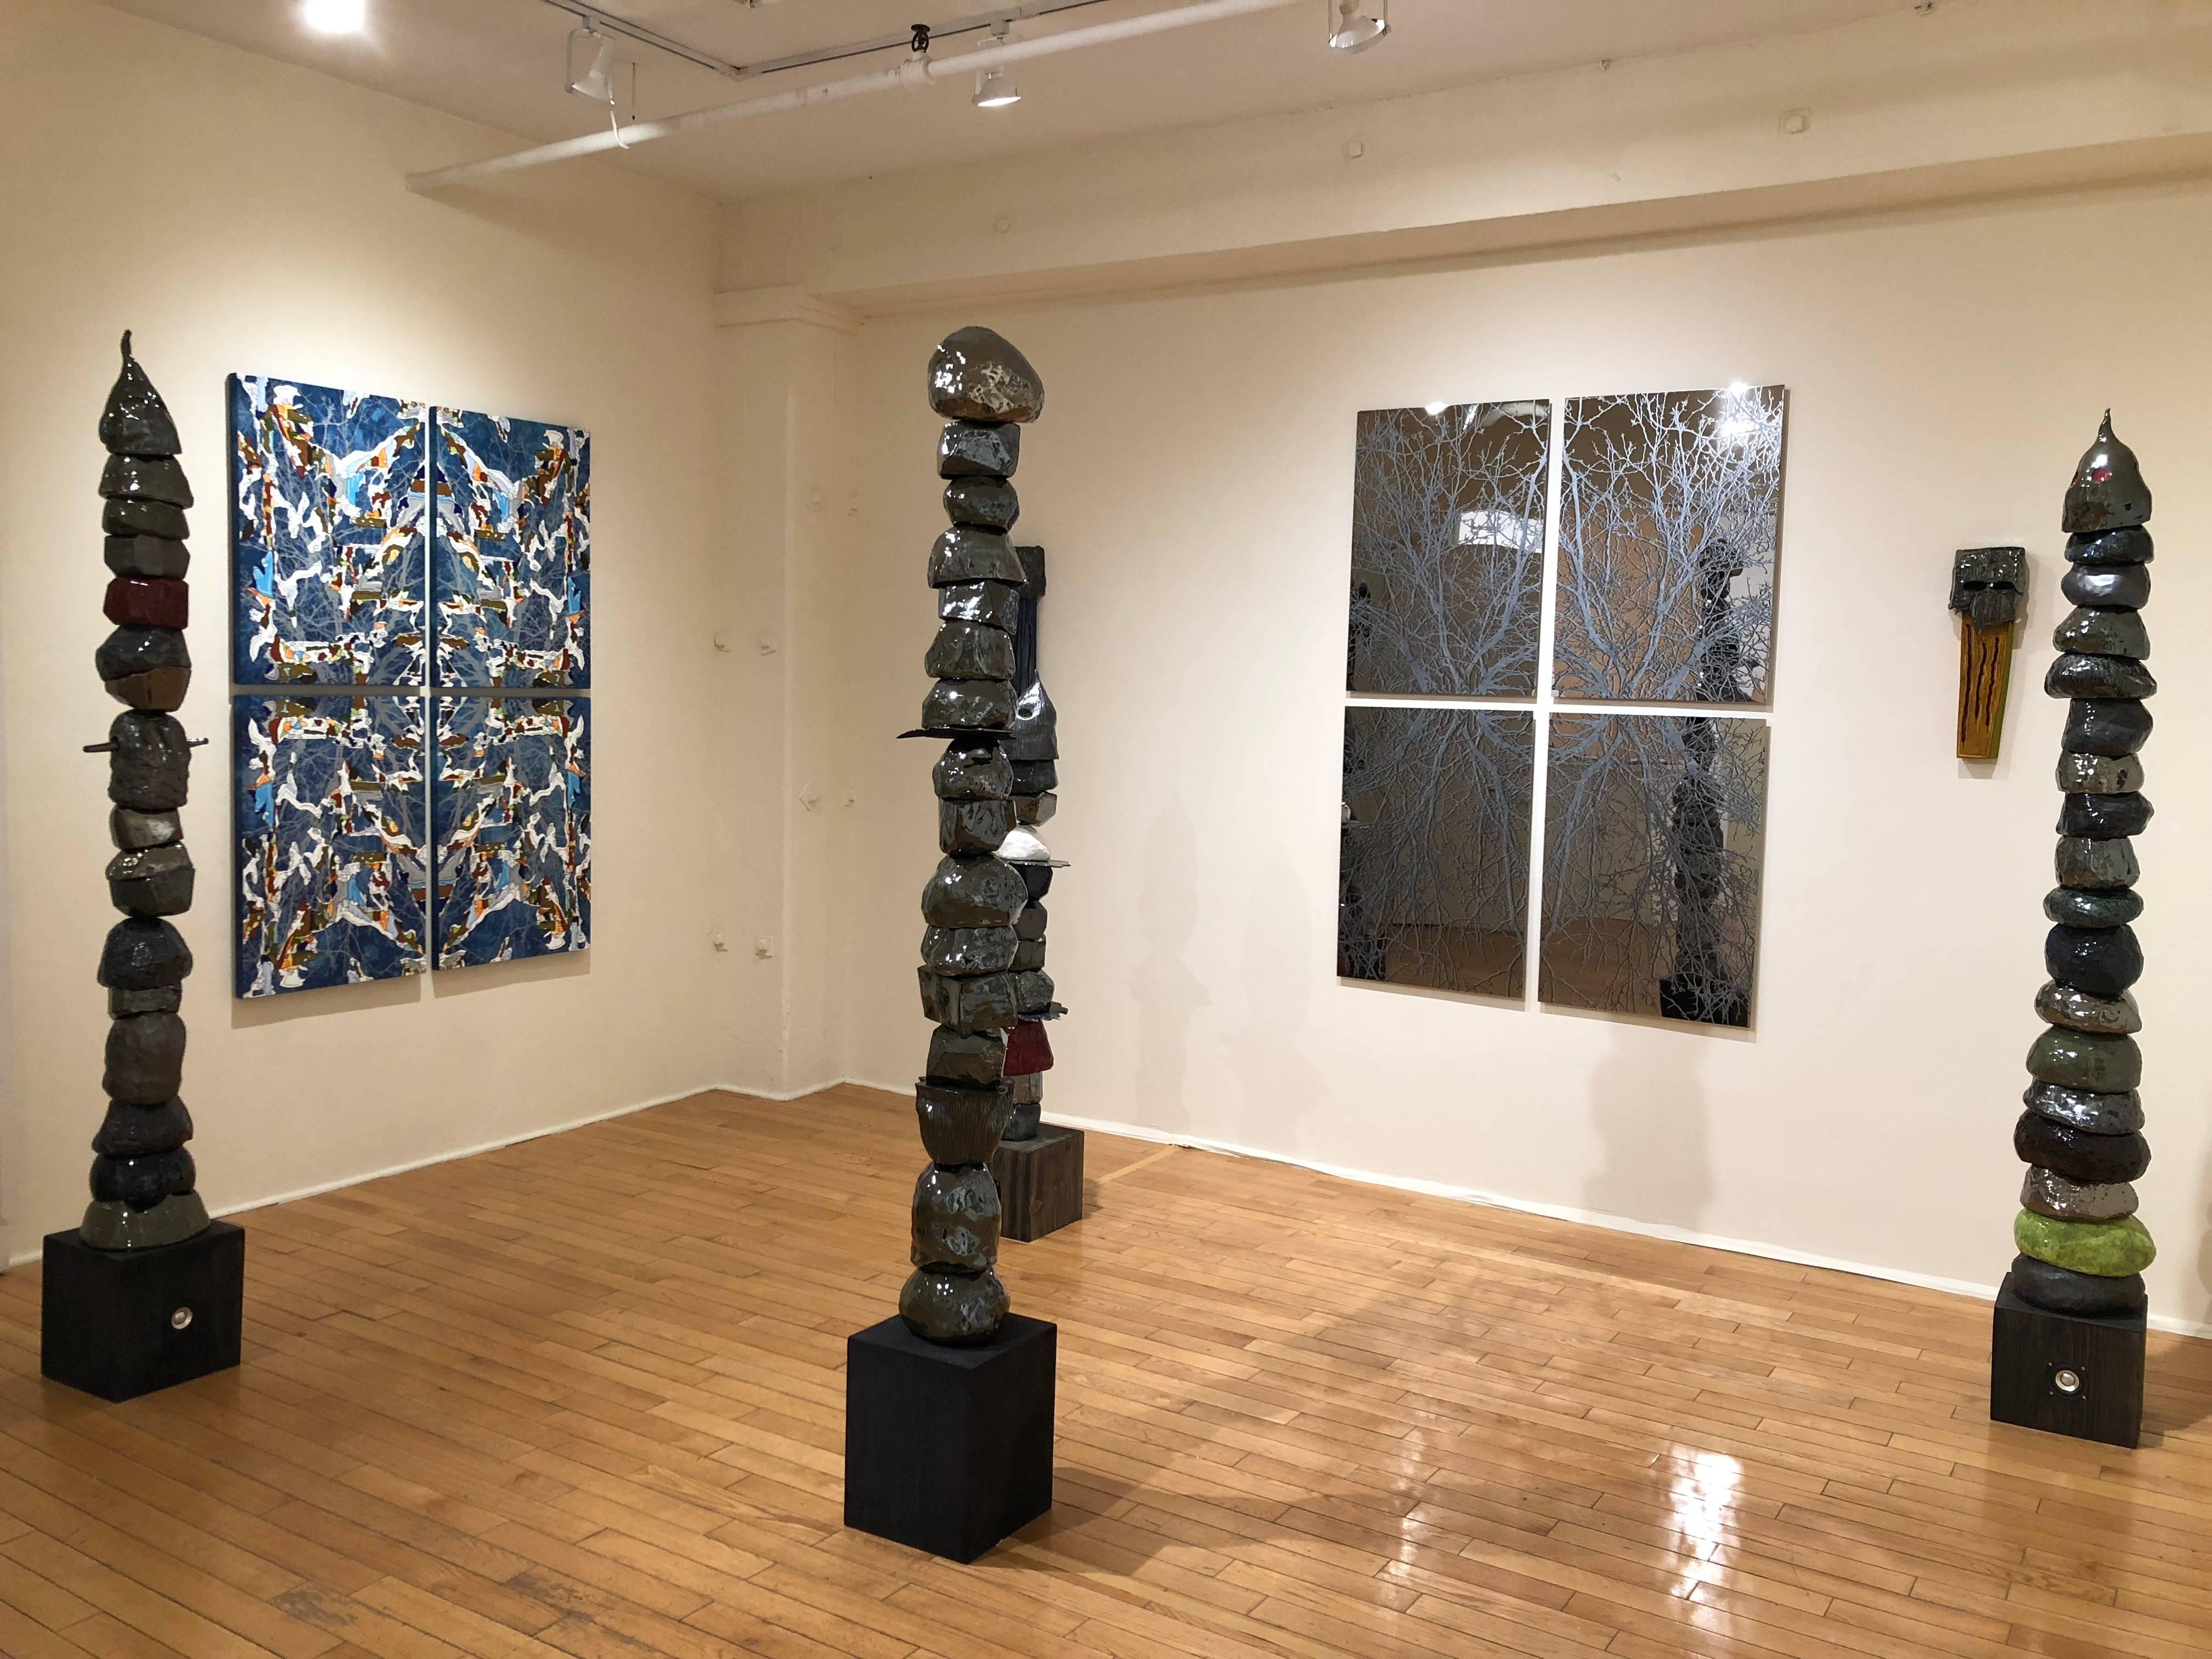 Ivcevich’s newest installation creates a wellspring of temporal tension. Drawing upon his interest in sociology, as well as his extensive international travels, Ivcevich blends innovative drafting technologies with traditional artisanal craft to